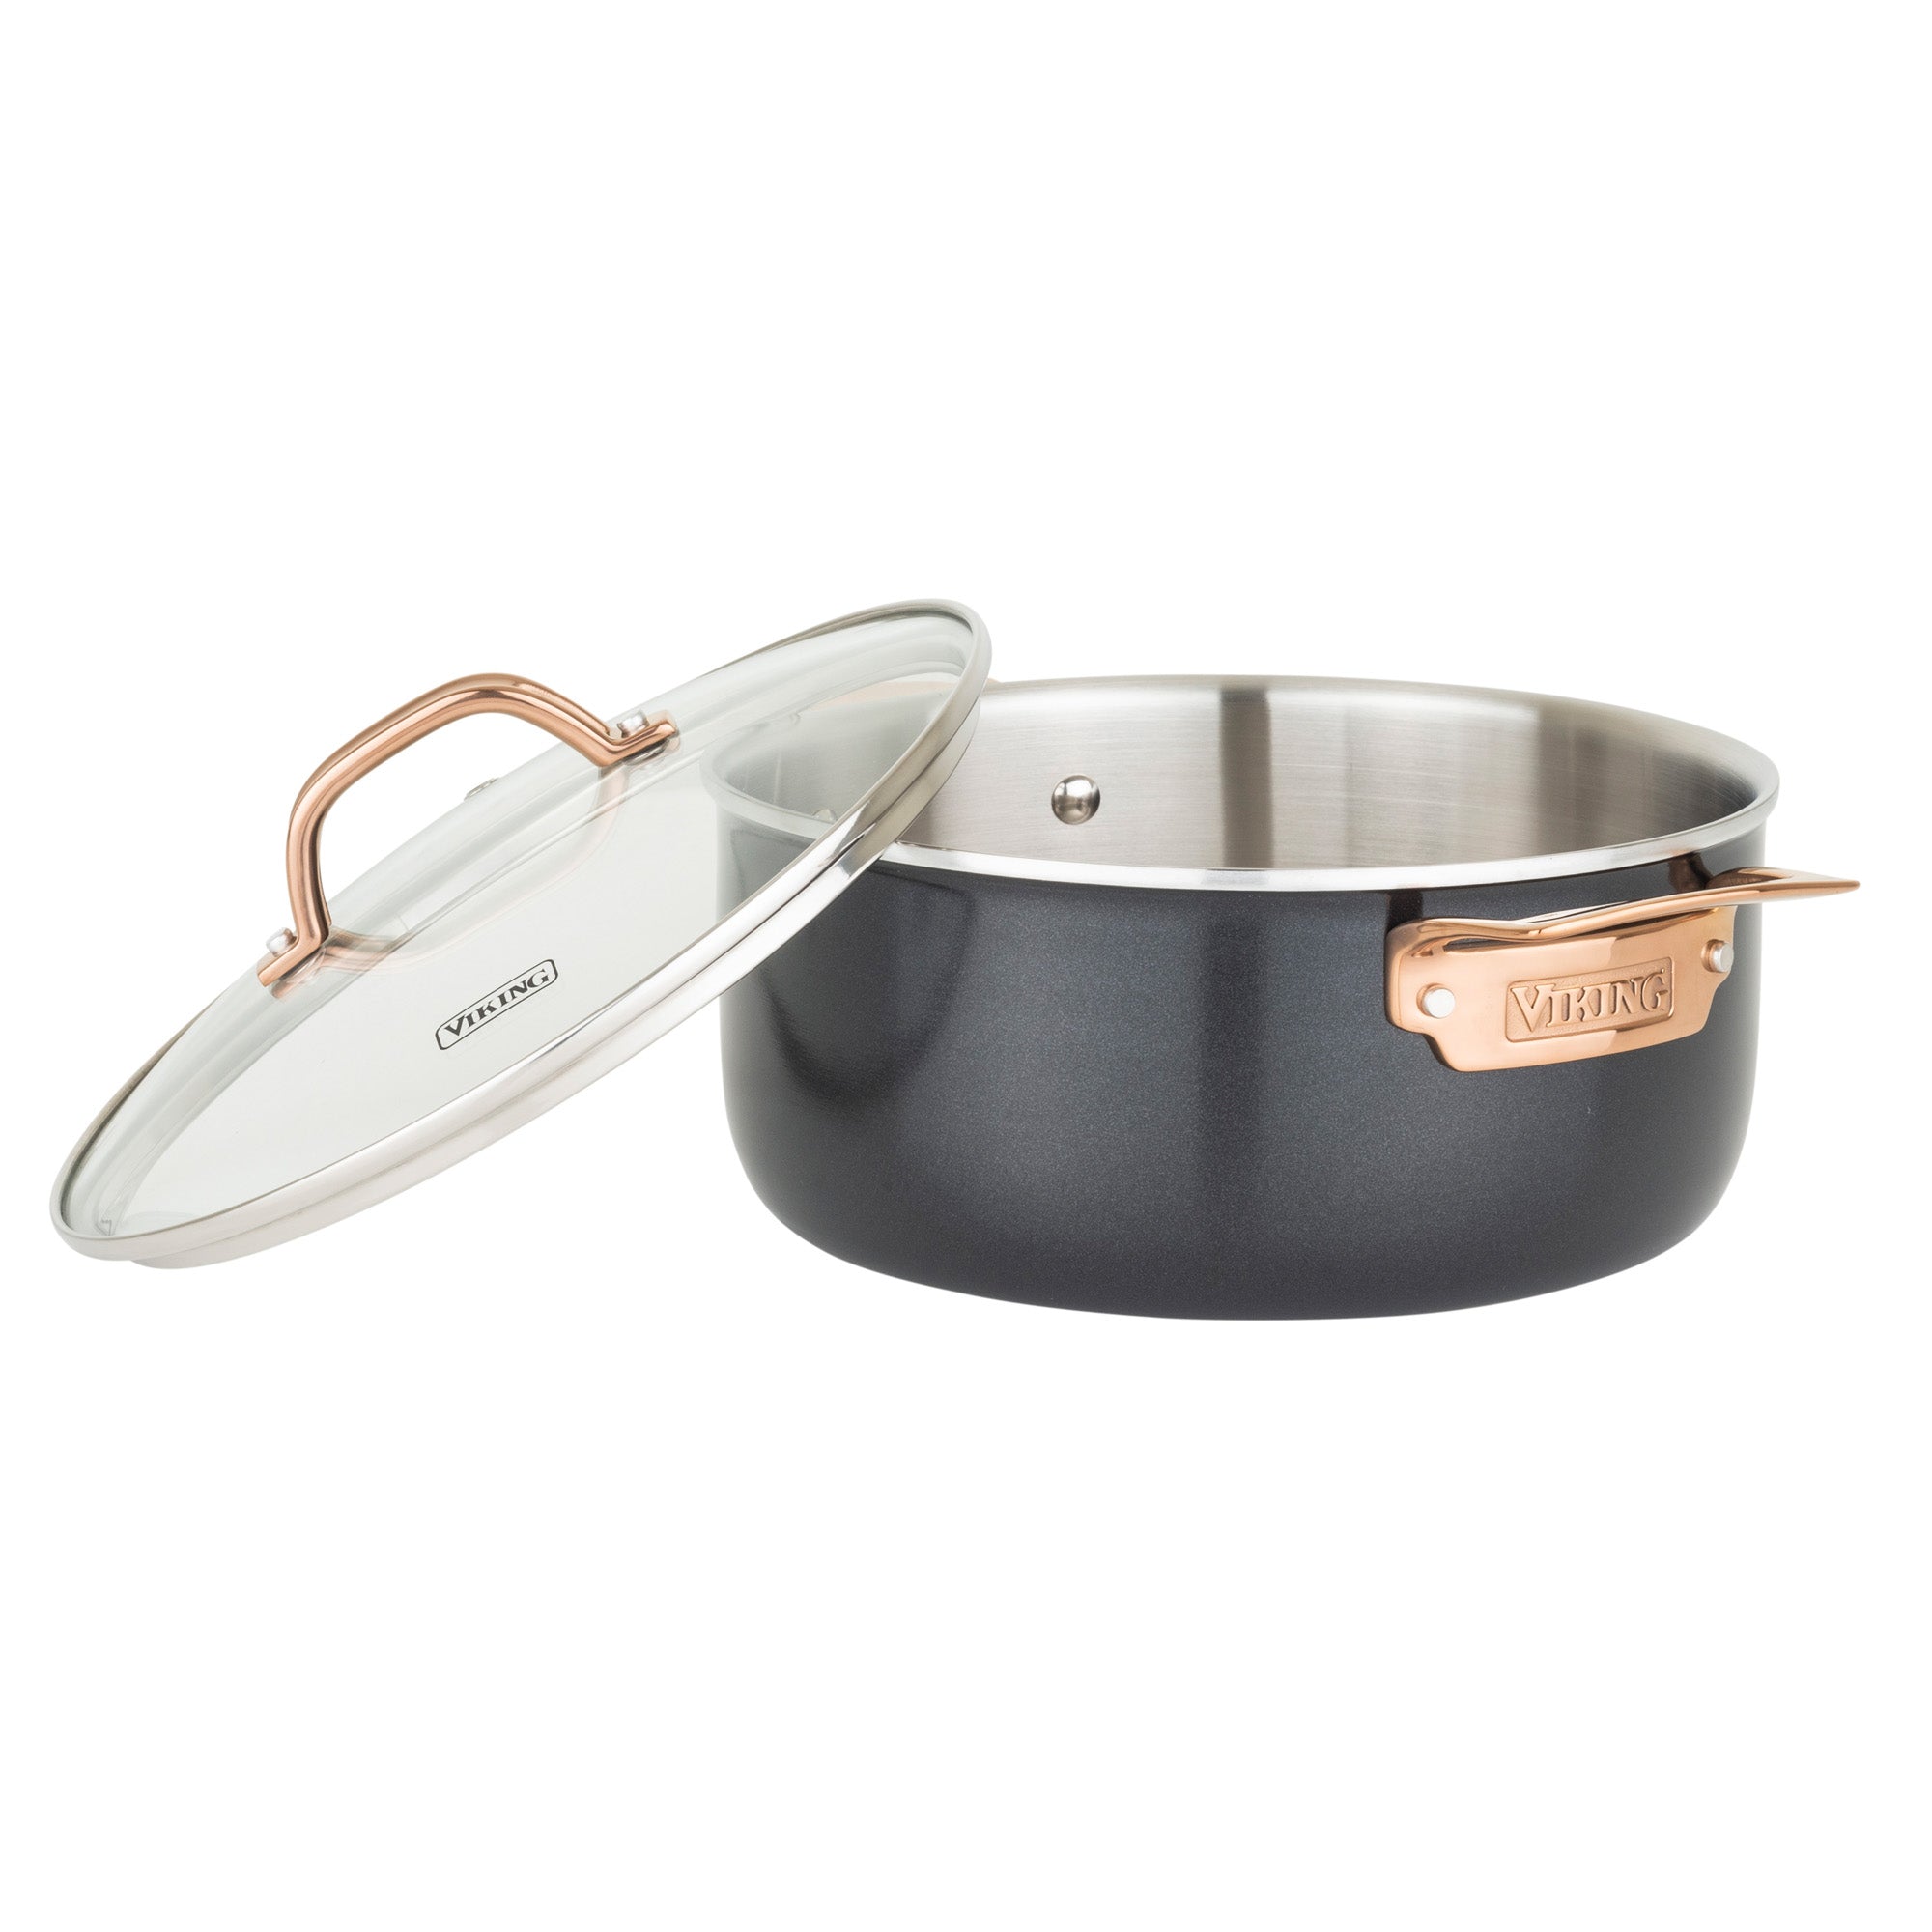 Kitchen Pans from Copper-Bottom Pan to Dutch Oven